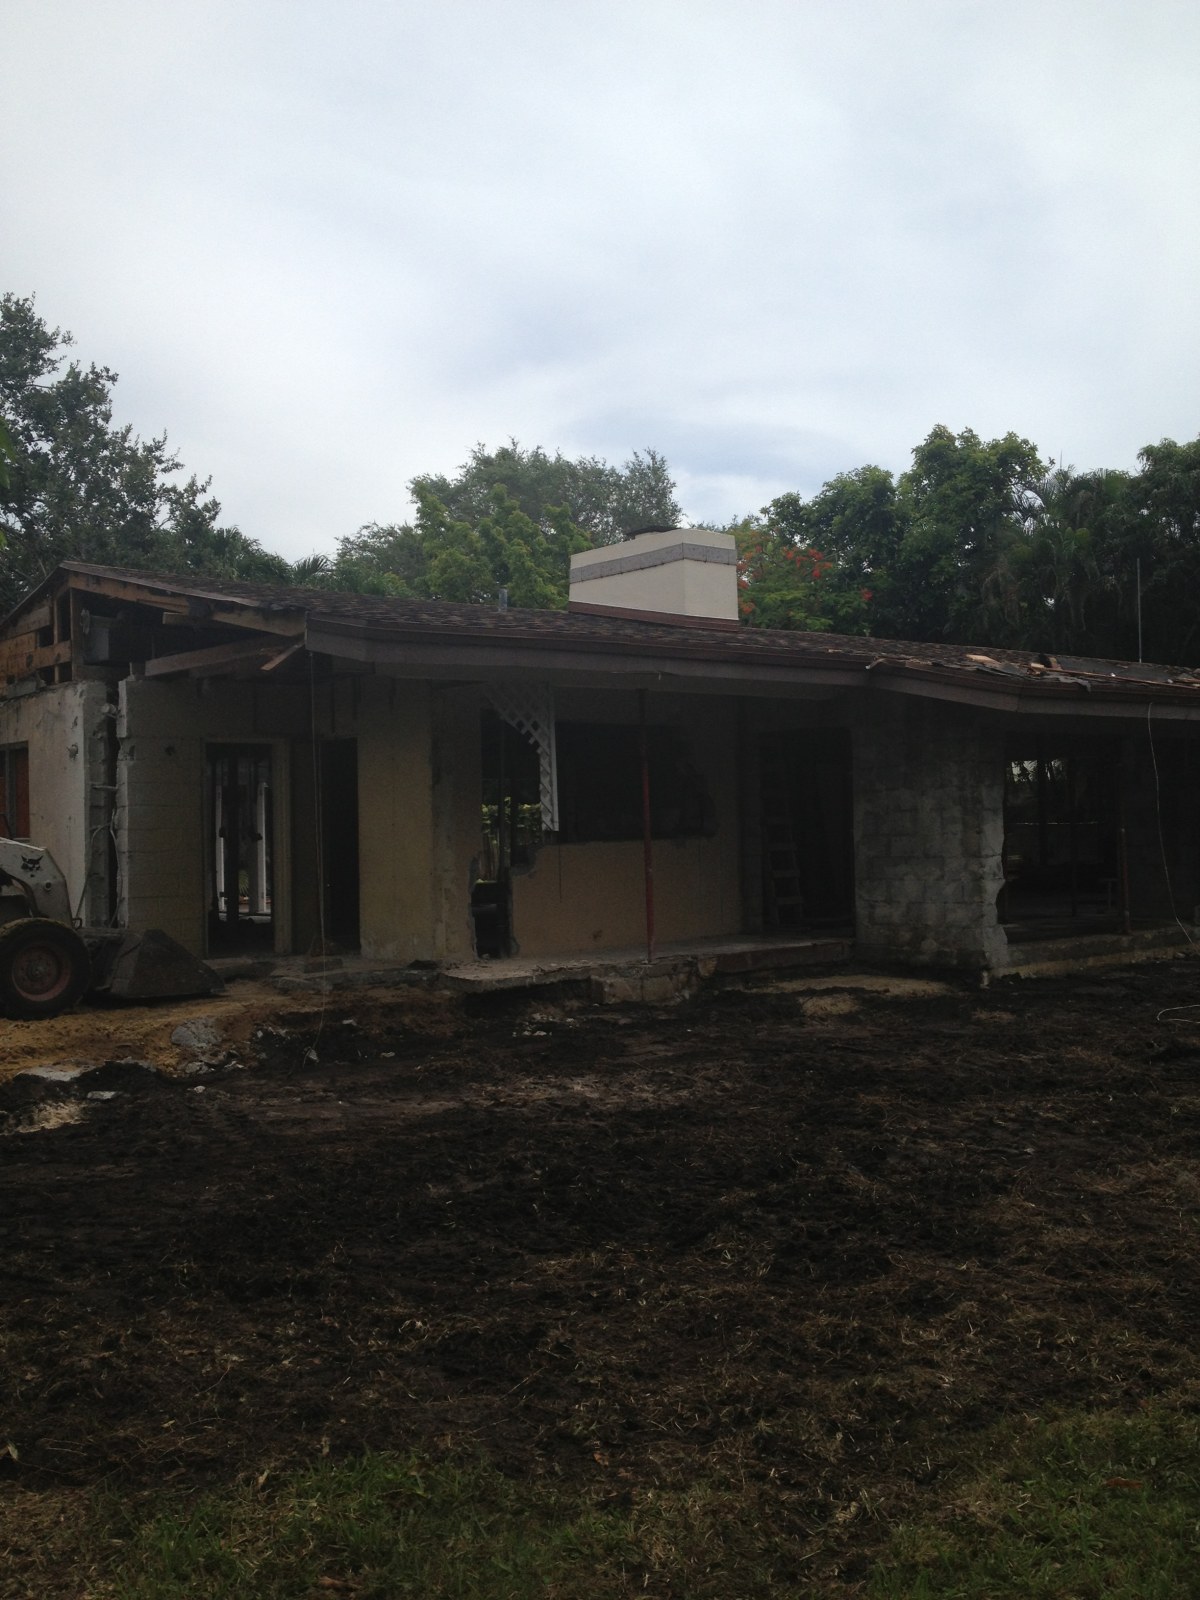 Pinecrest Remodel structural demo and prep